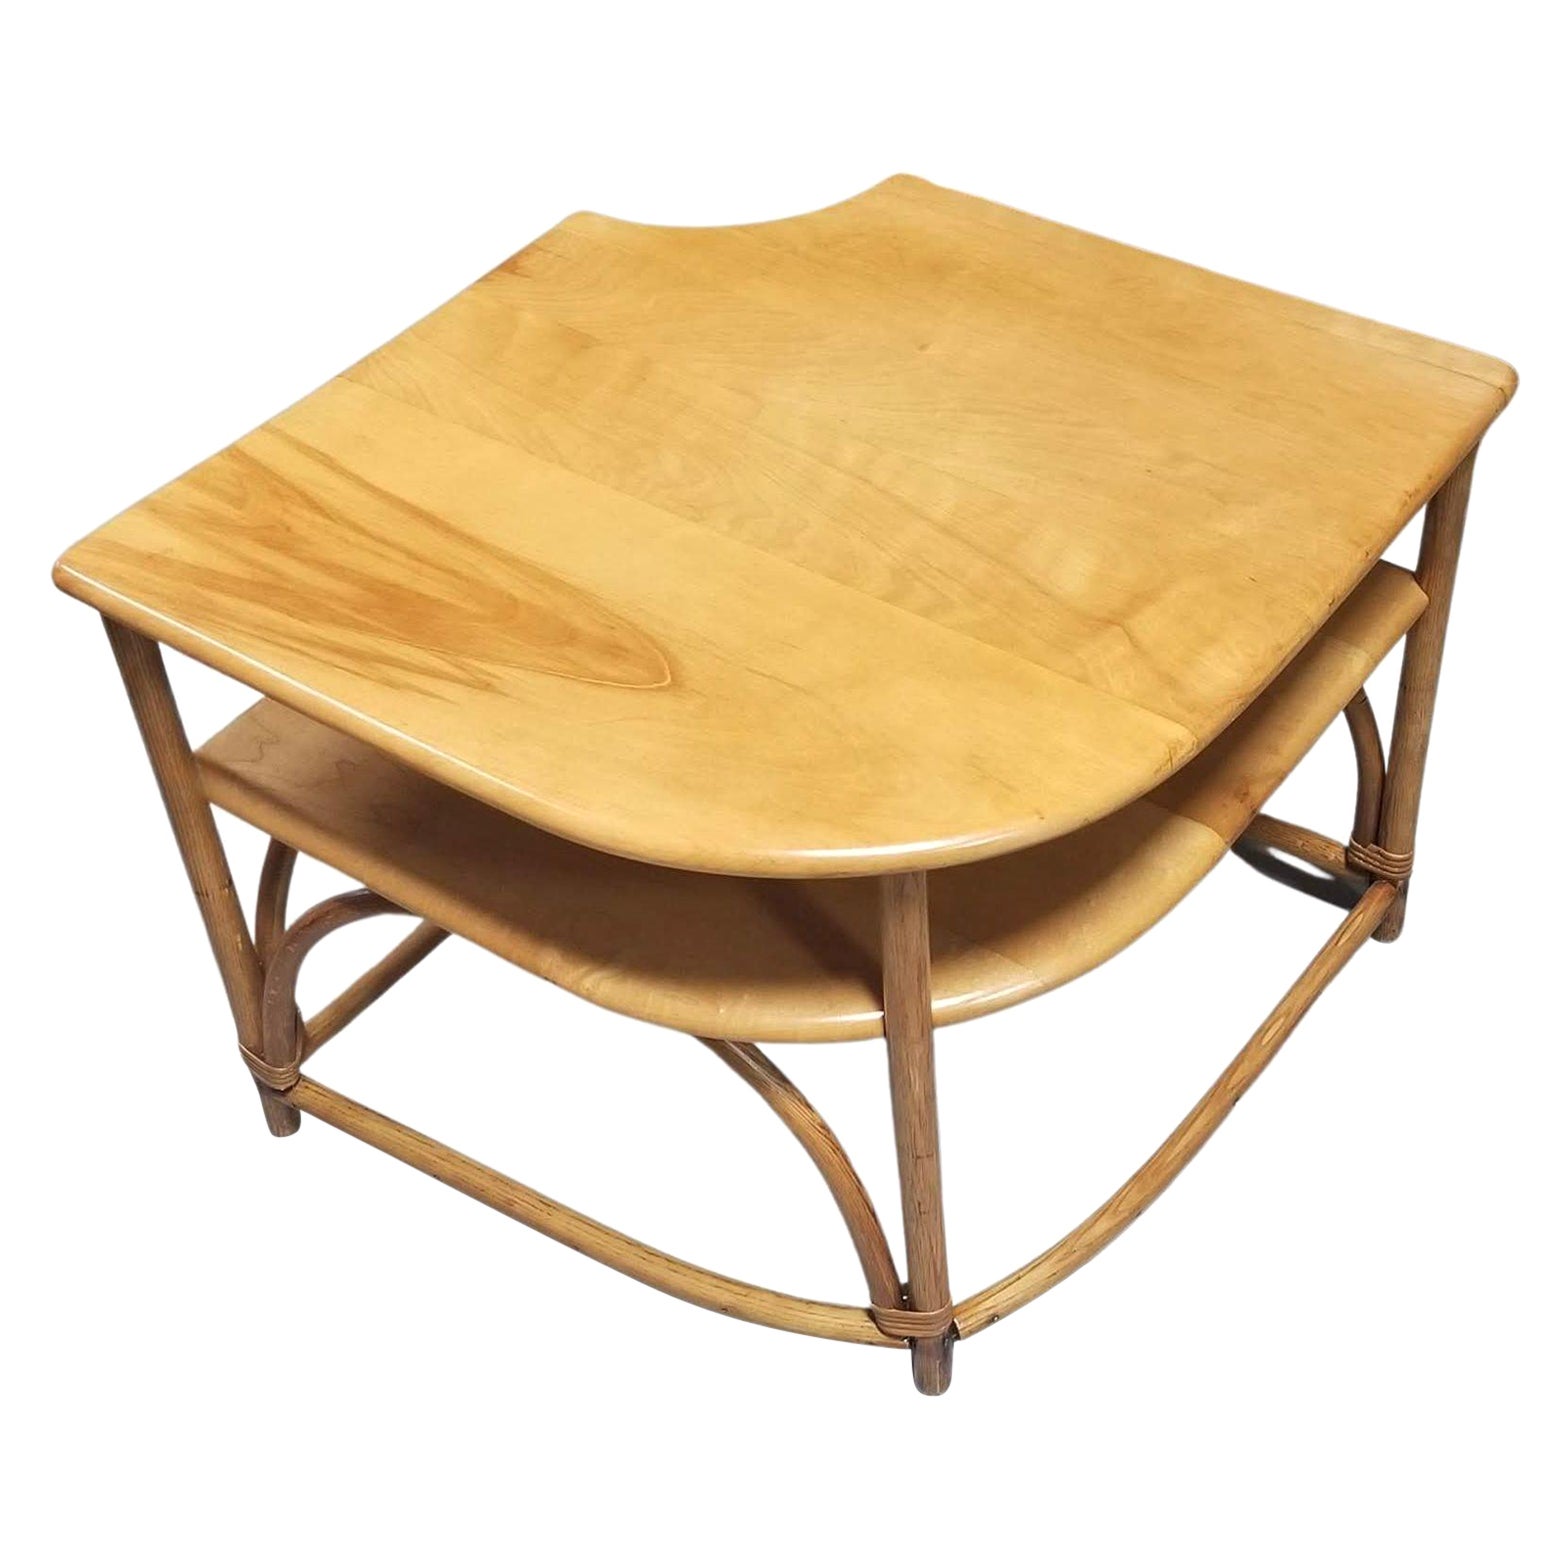 Restored Mid Century Maple and Faux Rattan Corner Table by Heywood Wakefield